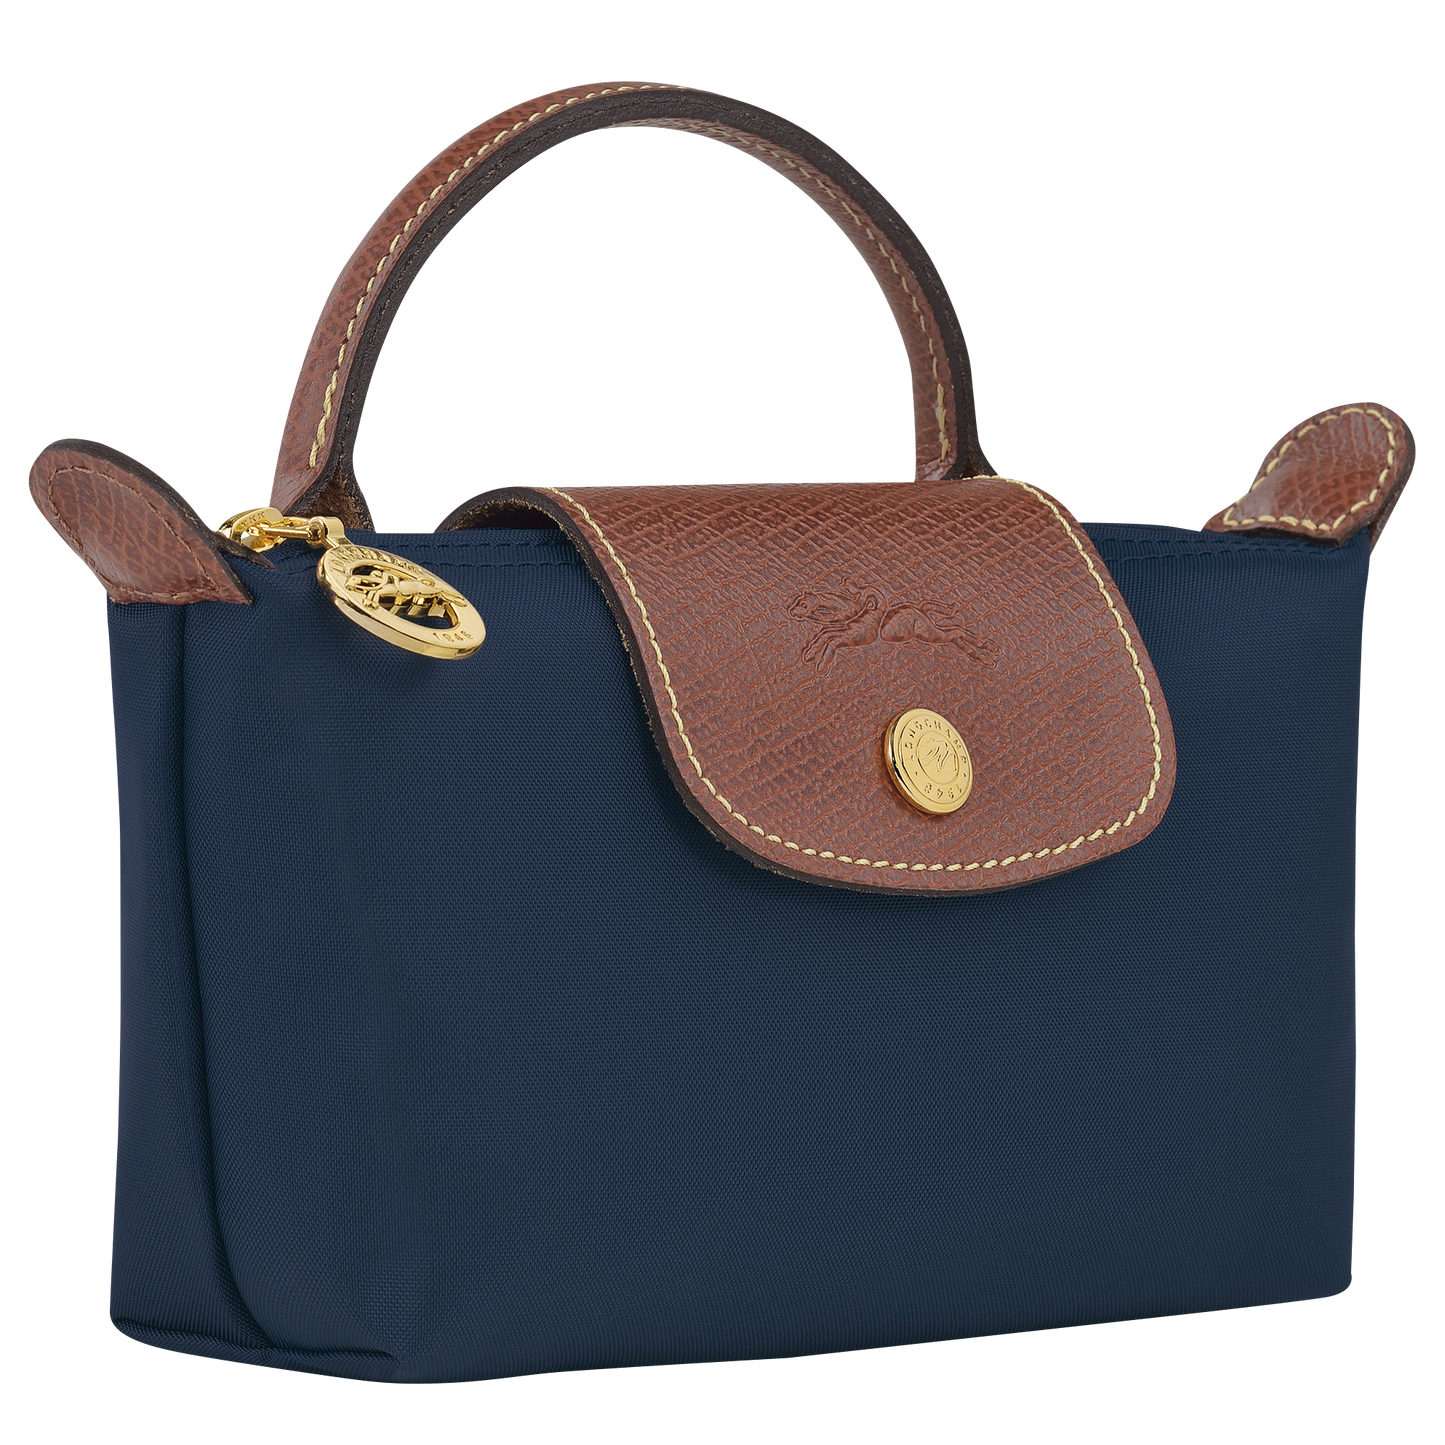 Longchamp LE PLIAGE ORIGINAL - Pouch with handle in Navy - 3 (SKU: 34175089P68)